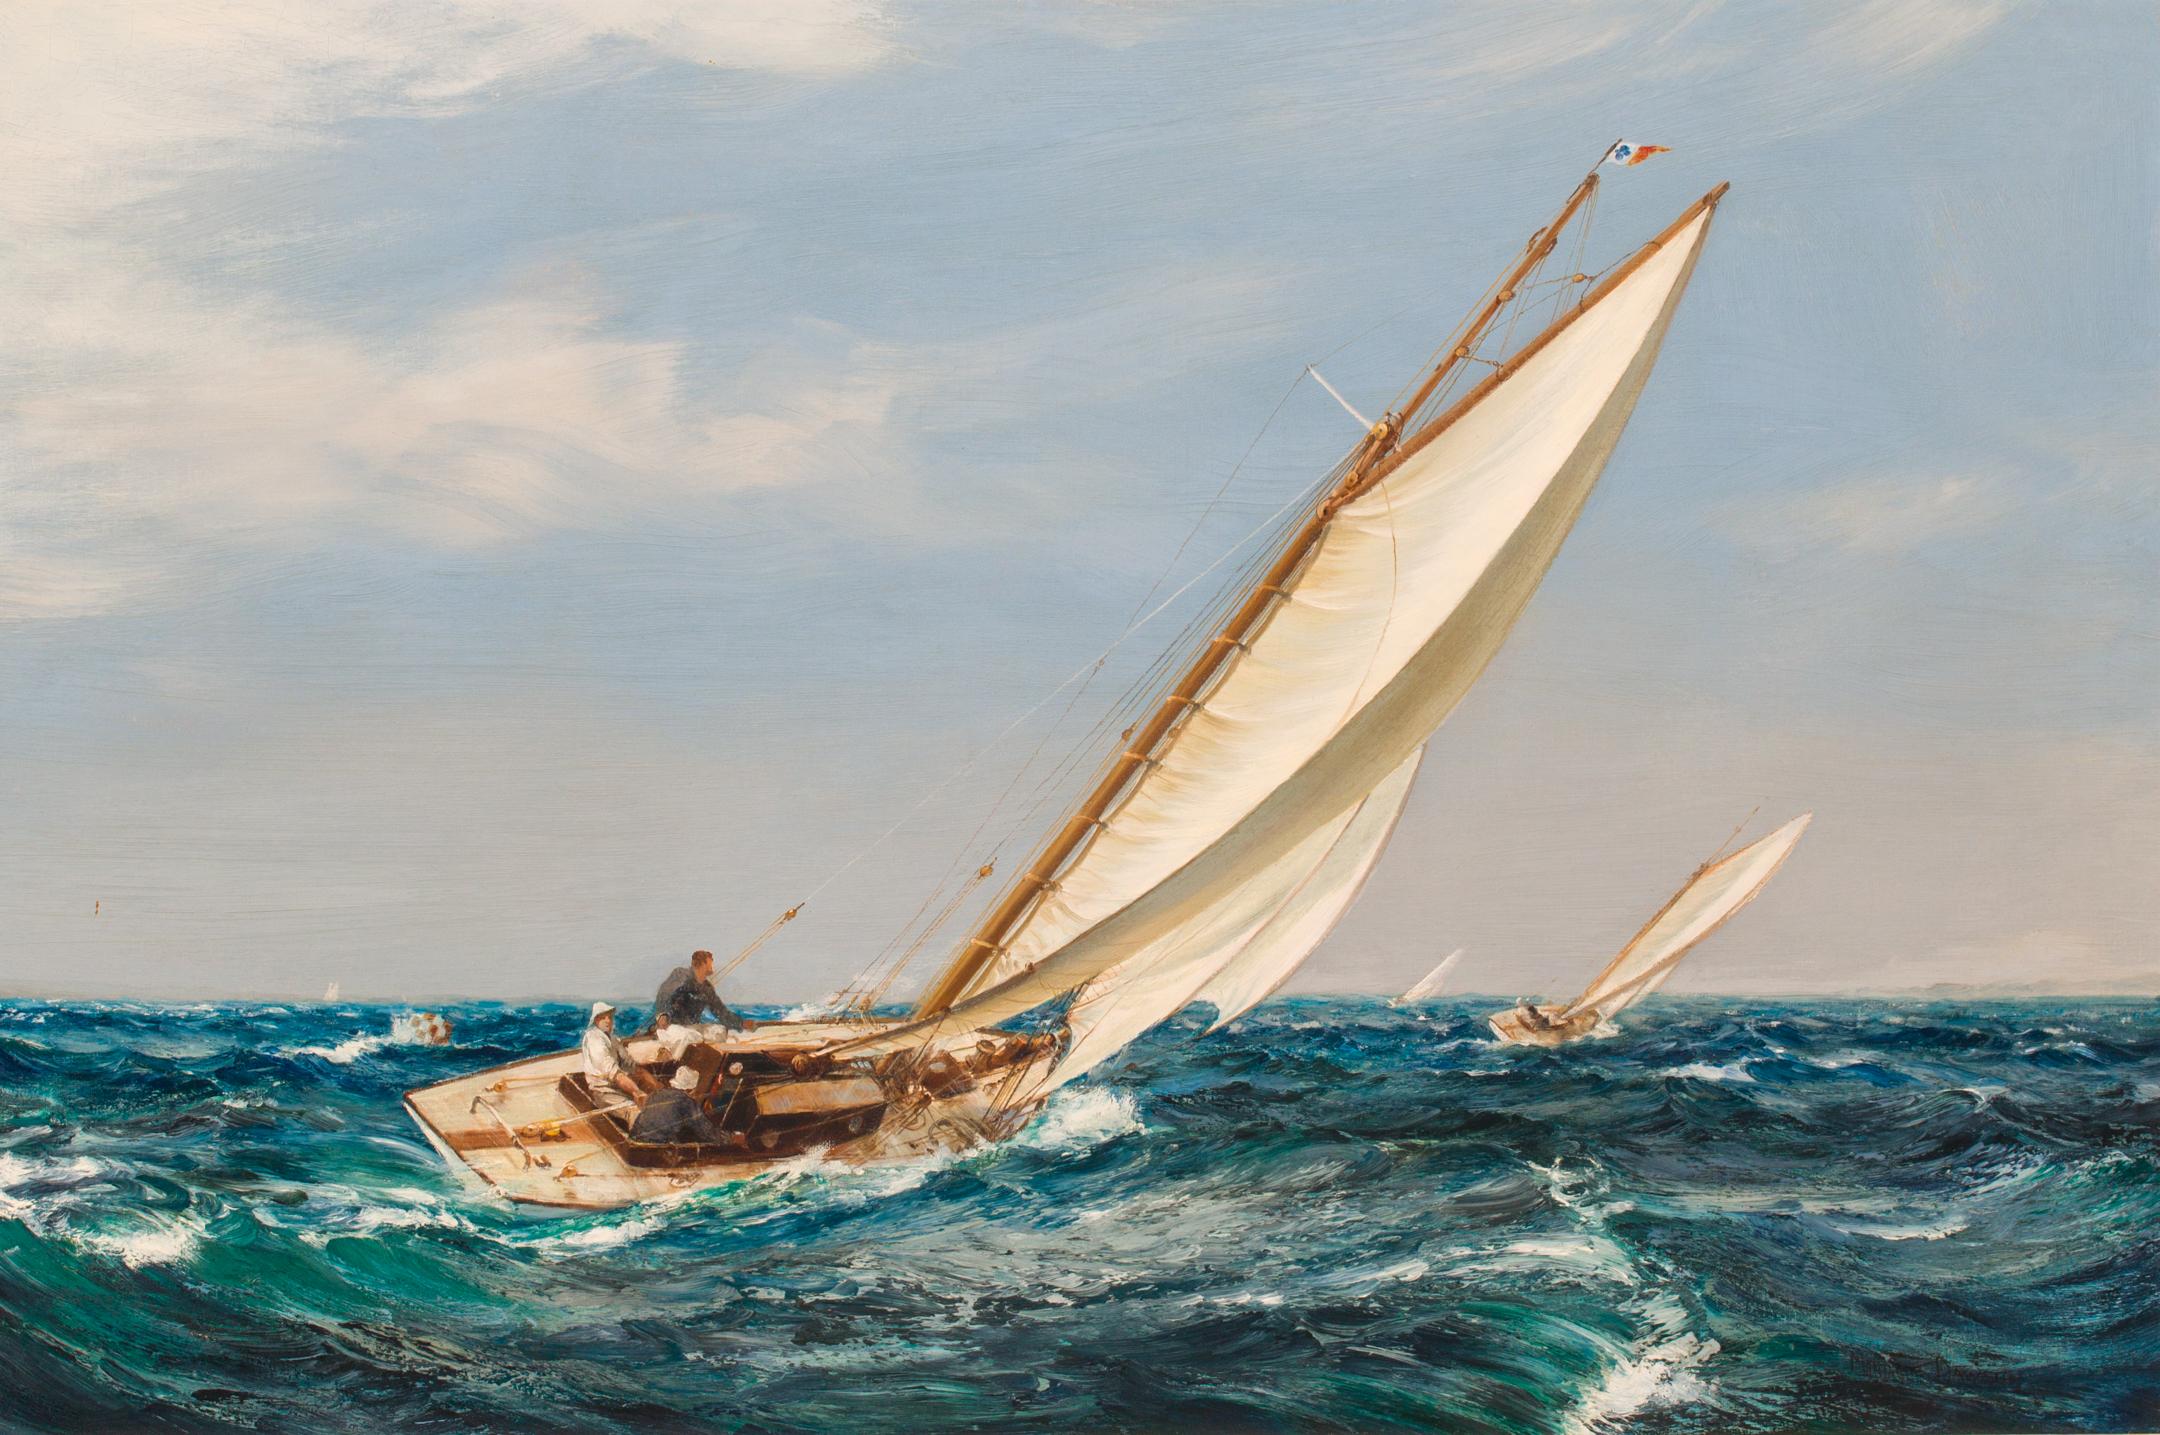 Solent Ones Rounding the Lepe Mark - Painting by Montague Dawson